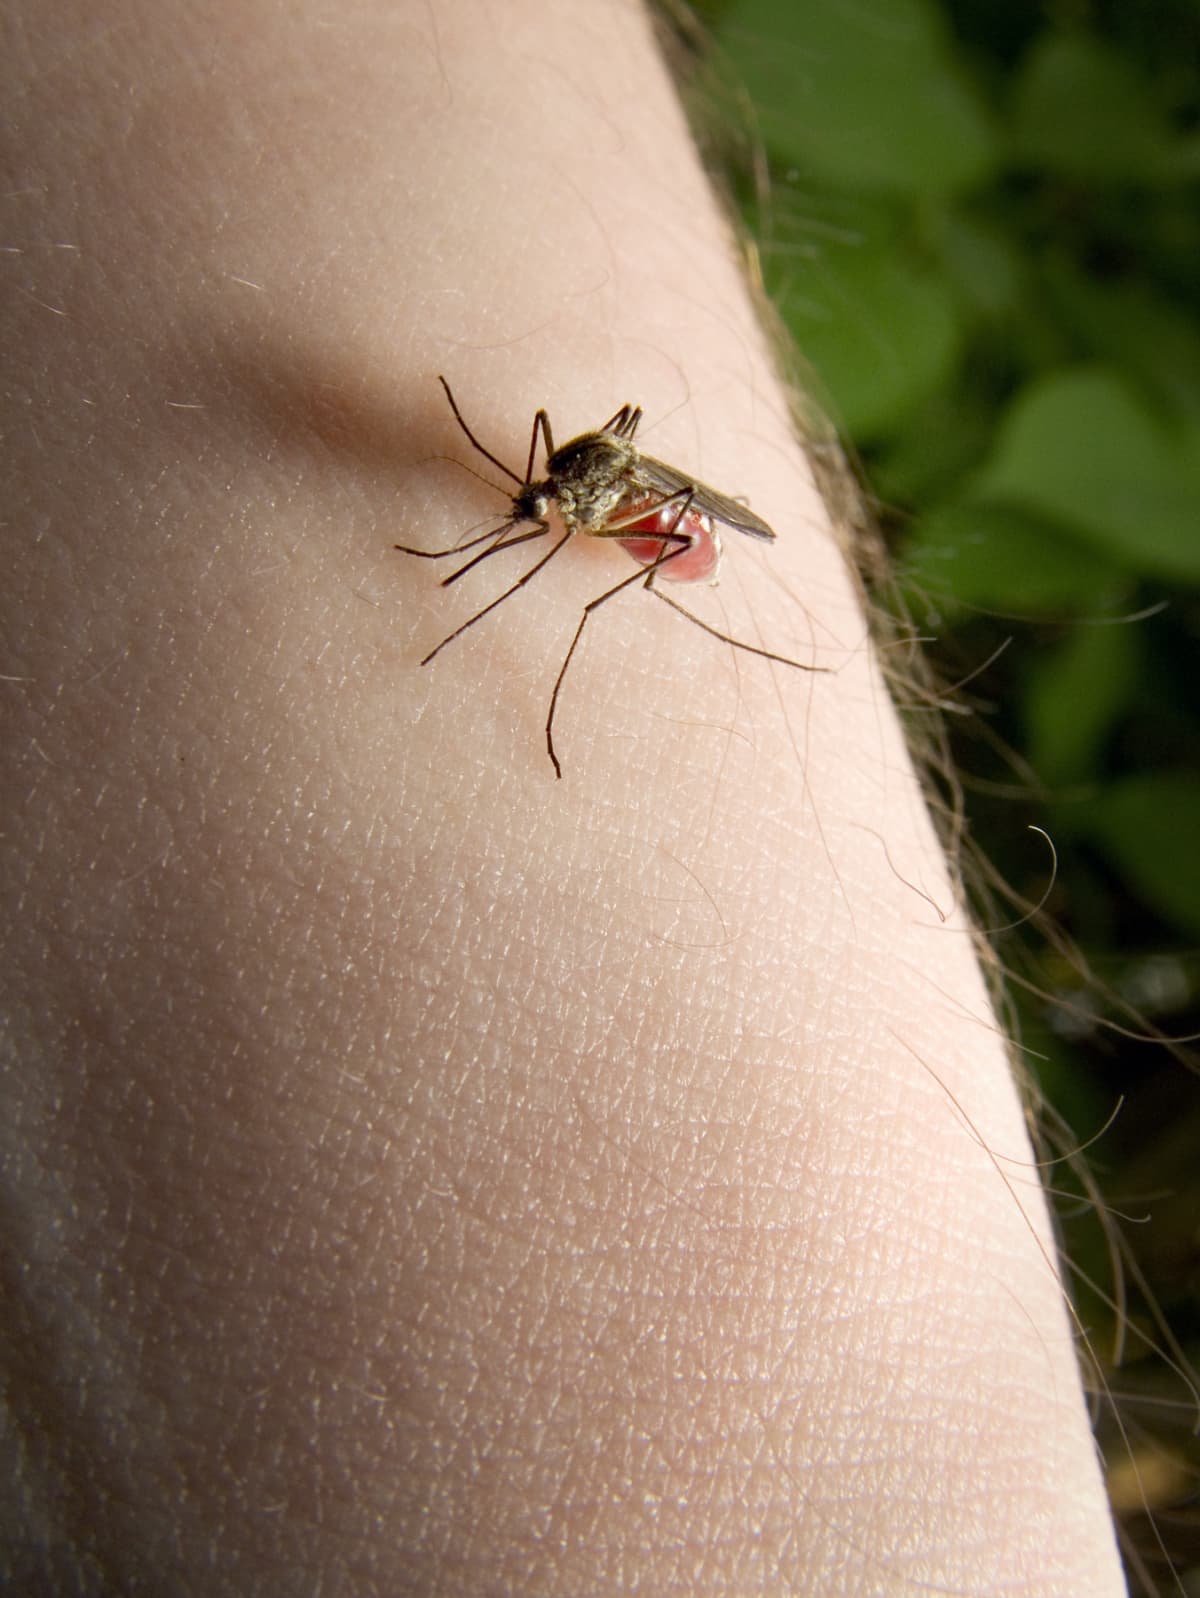 Mosquito biting a person's skin